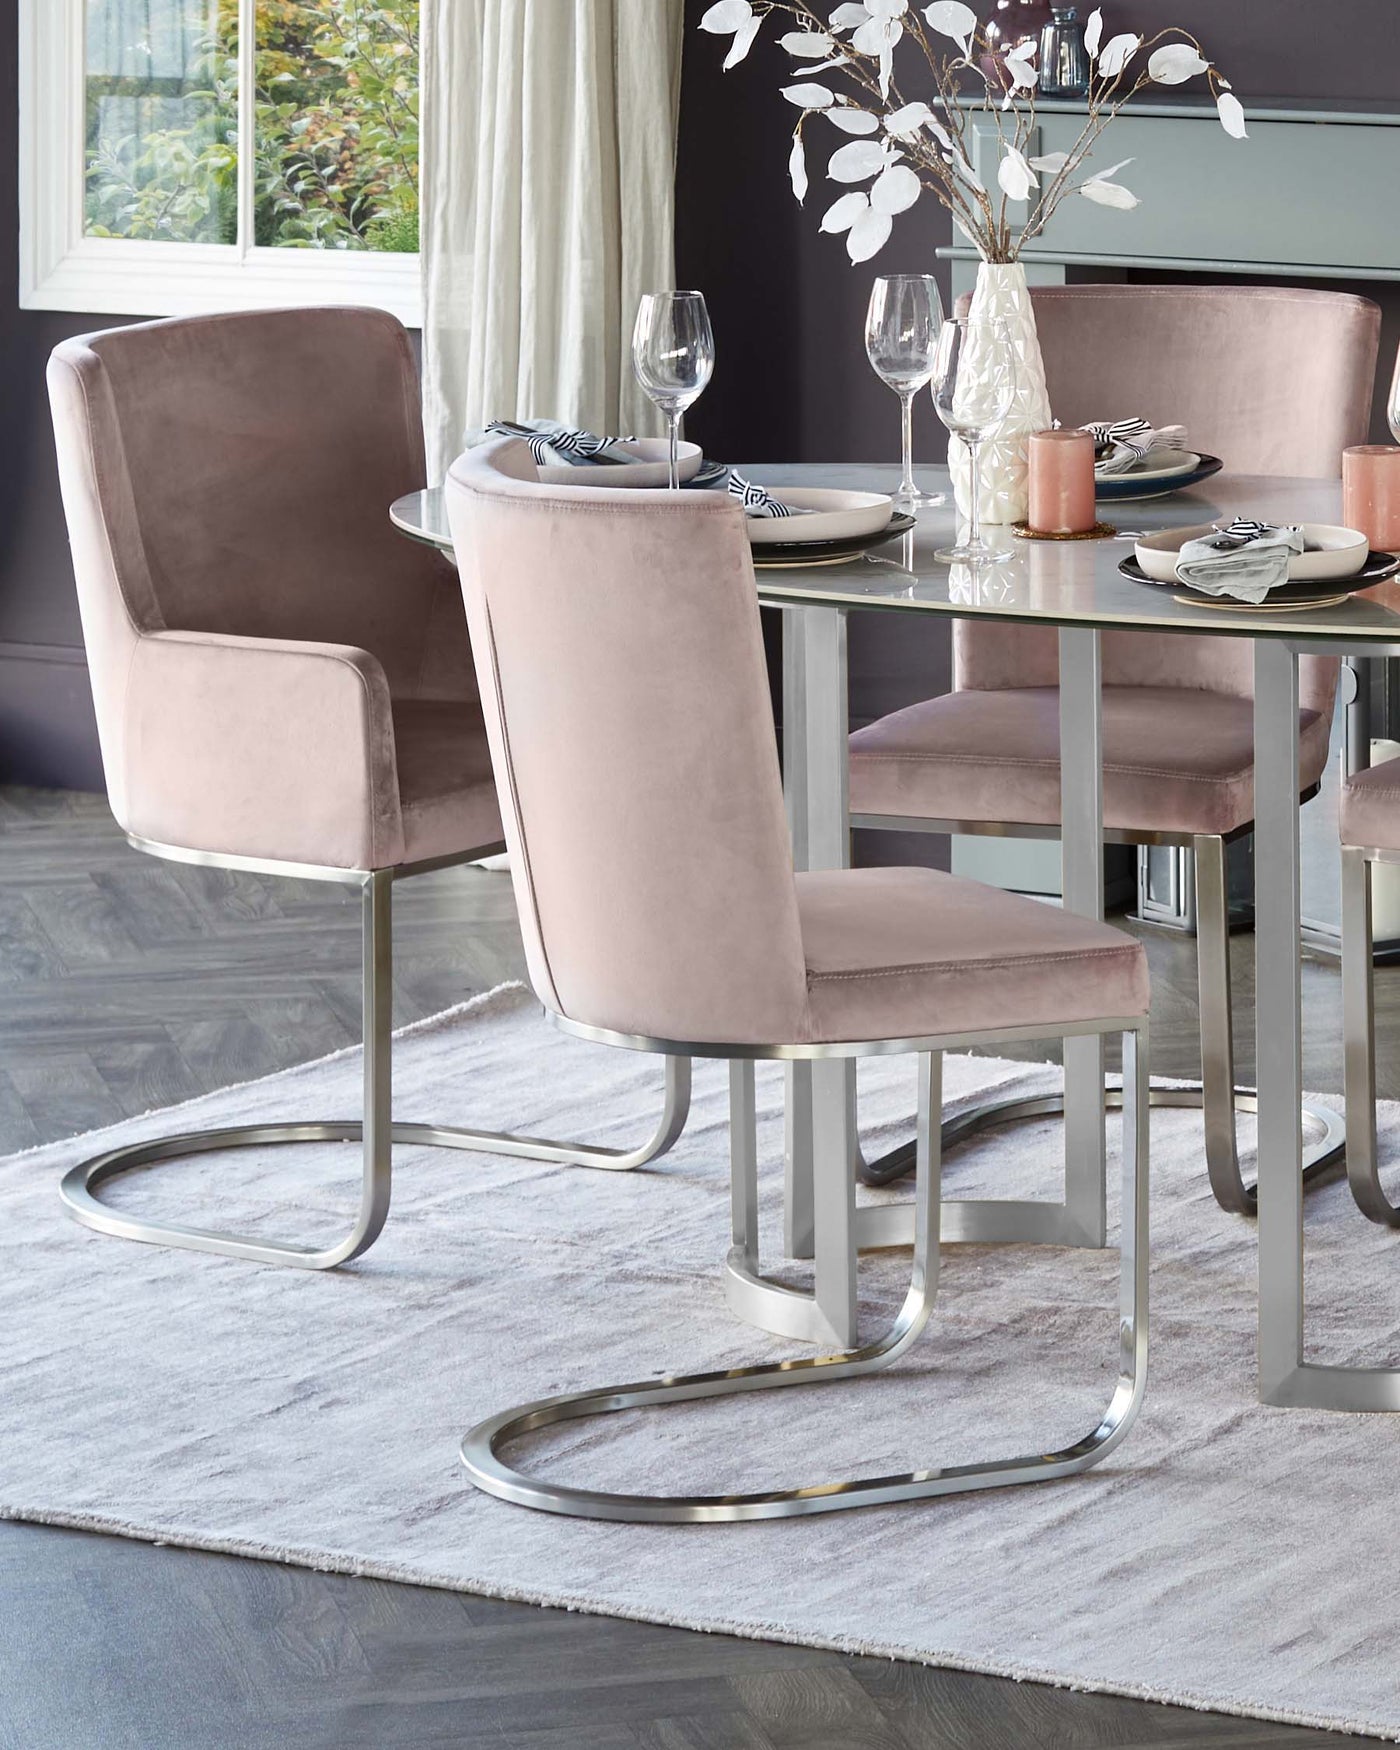 Elegant modern dining room furniture consisting of a clear glass-top table with sleek metallic silver legs and plush velvet-upholstered dining chairs in blush pink featuring unique curved chrome bases. The set is complemented by a soft grey area rug beneath.